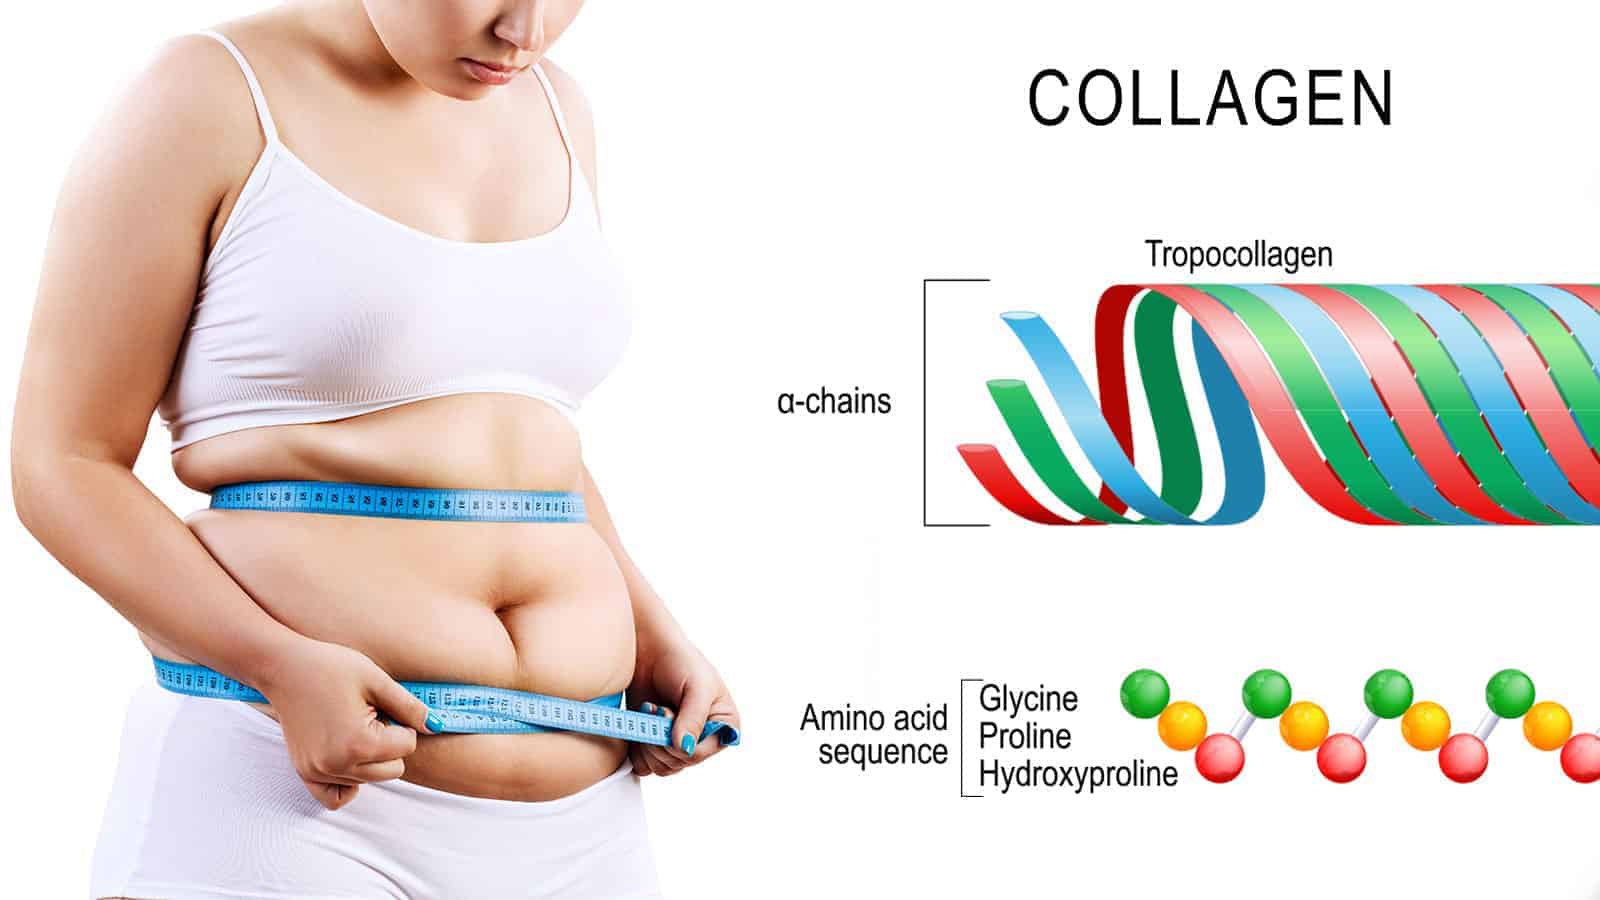 Does Collagen Really Help in Weight Loss? Here is What the Experts Say